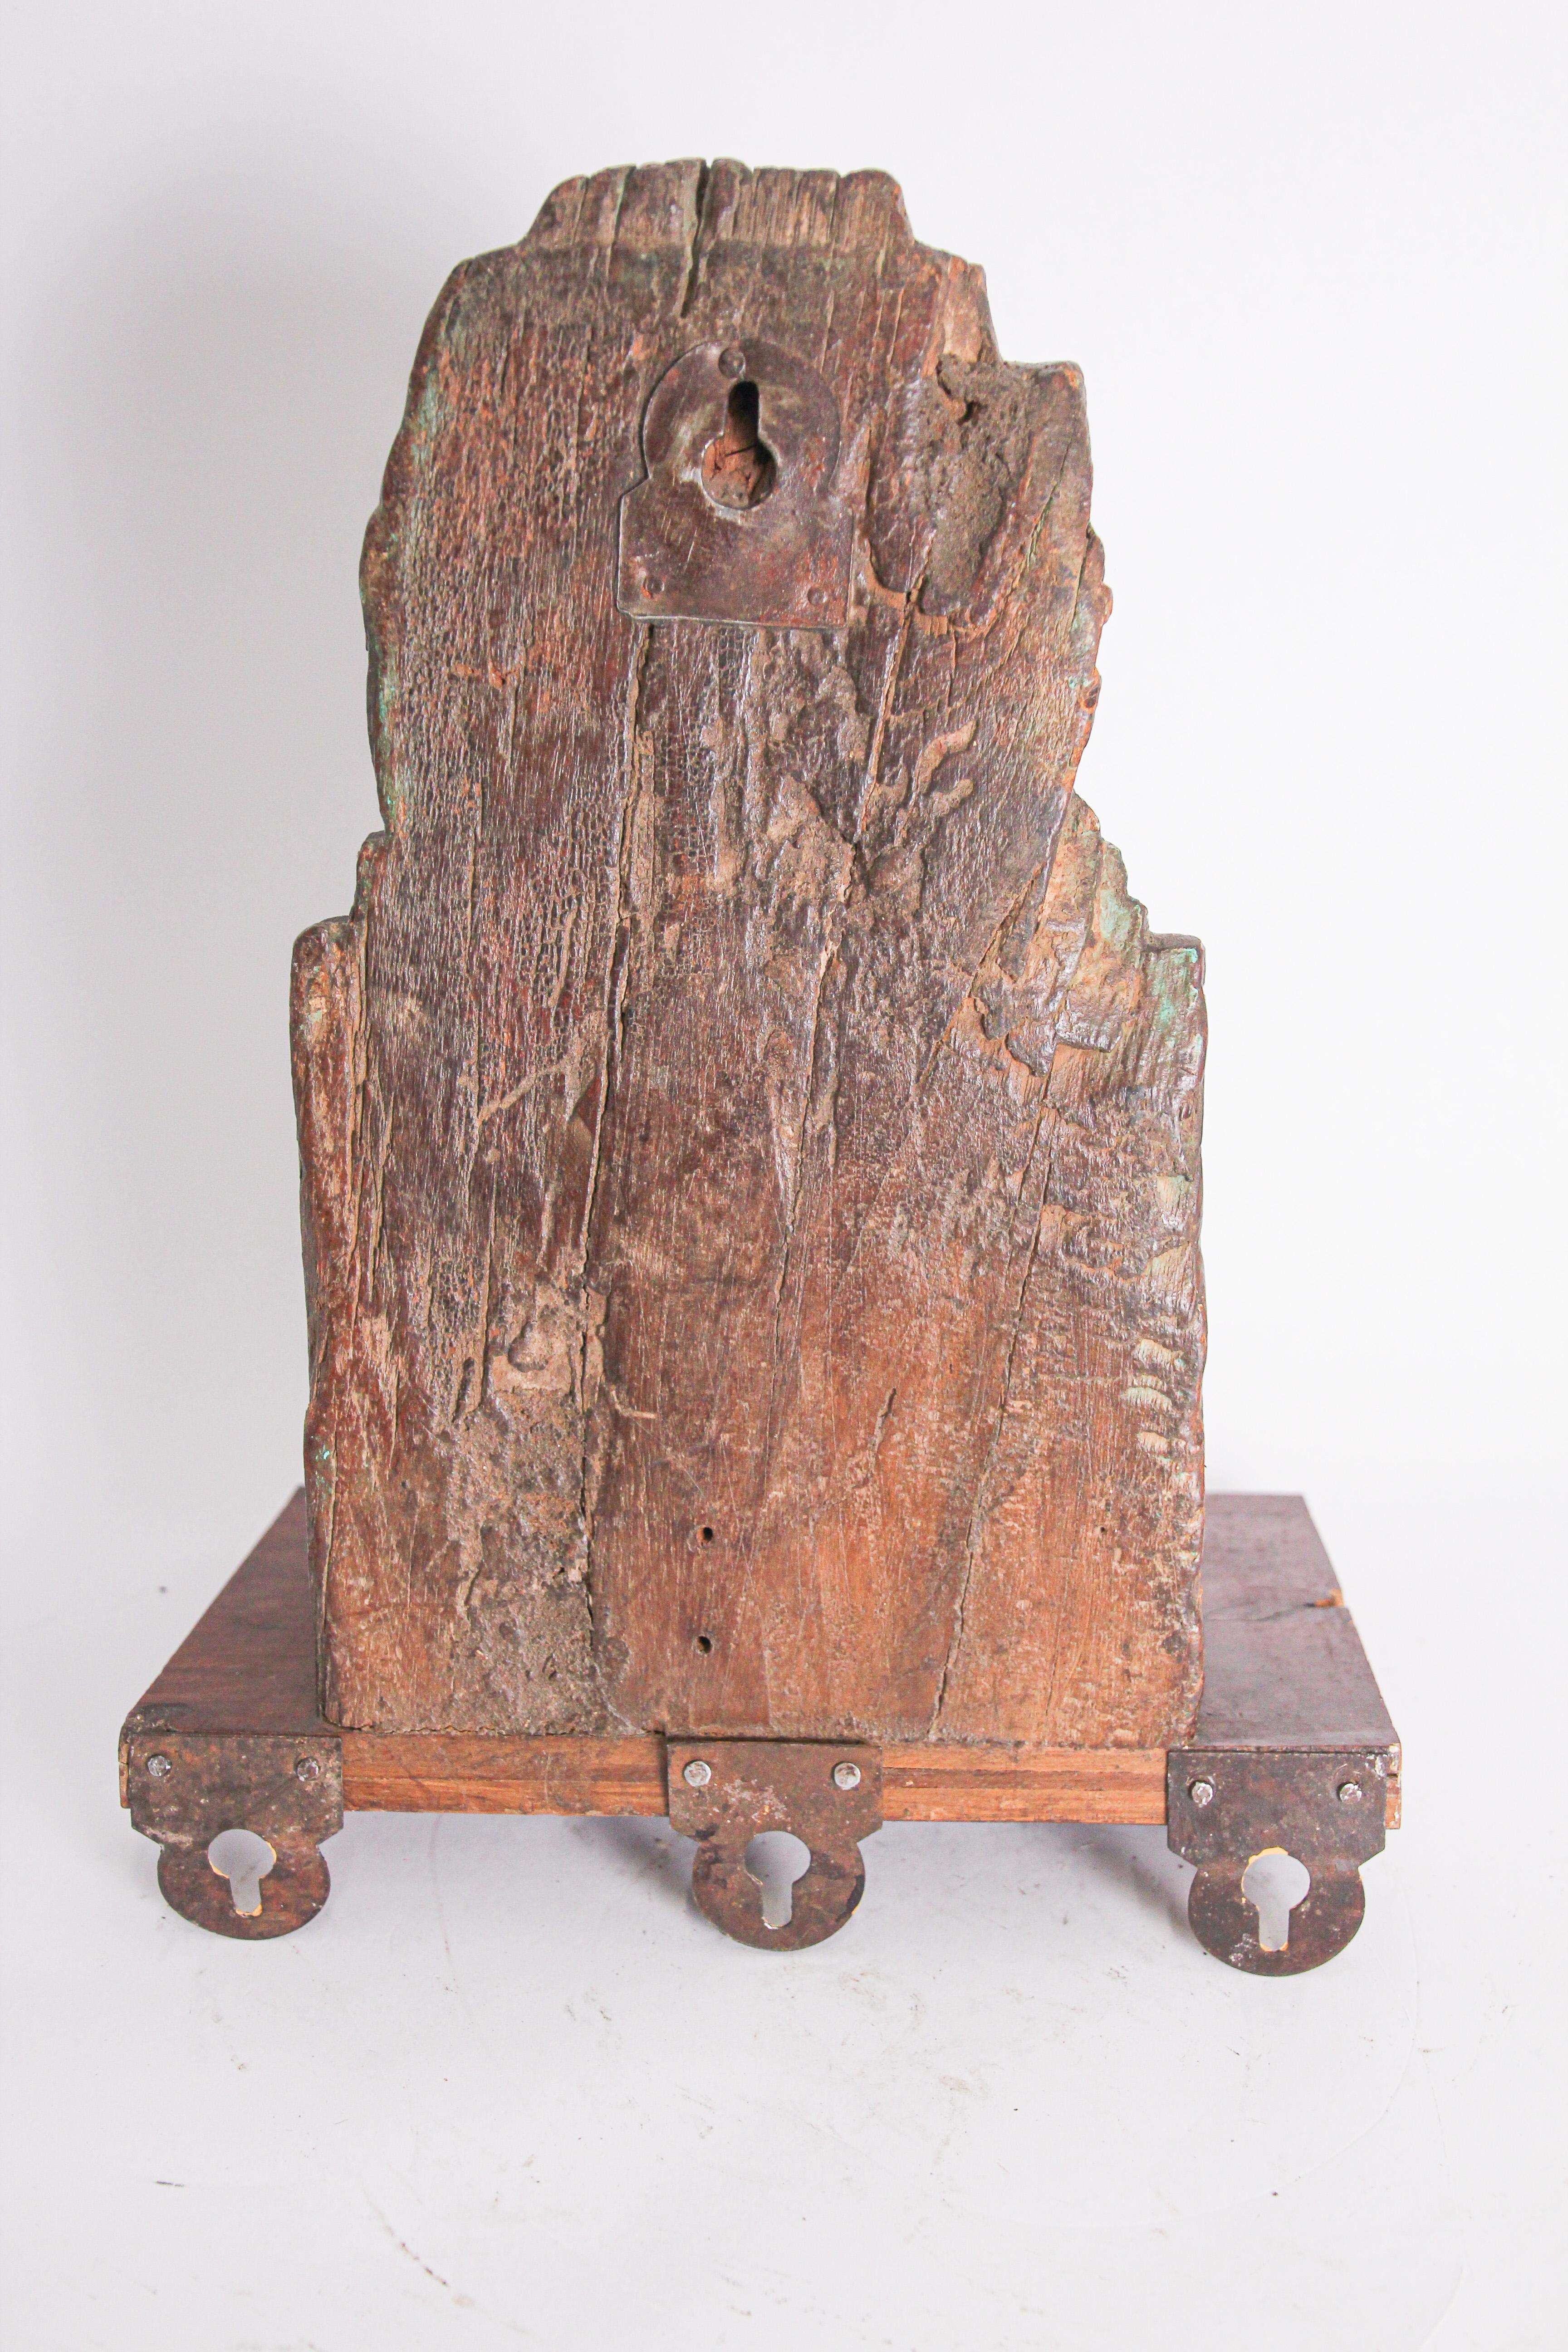 Anglo Raj Wall Bracket Architectural Carved Wood Fragment from India For Sale